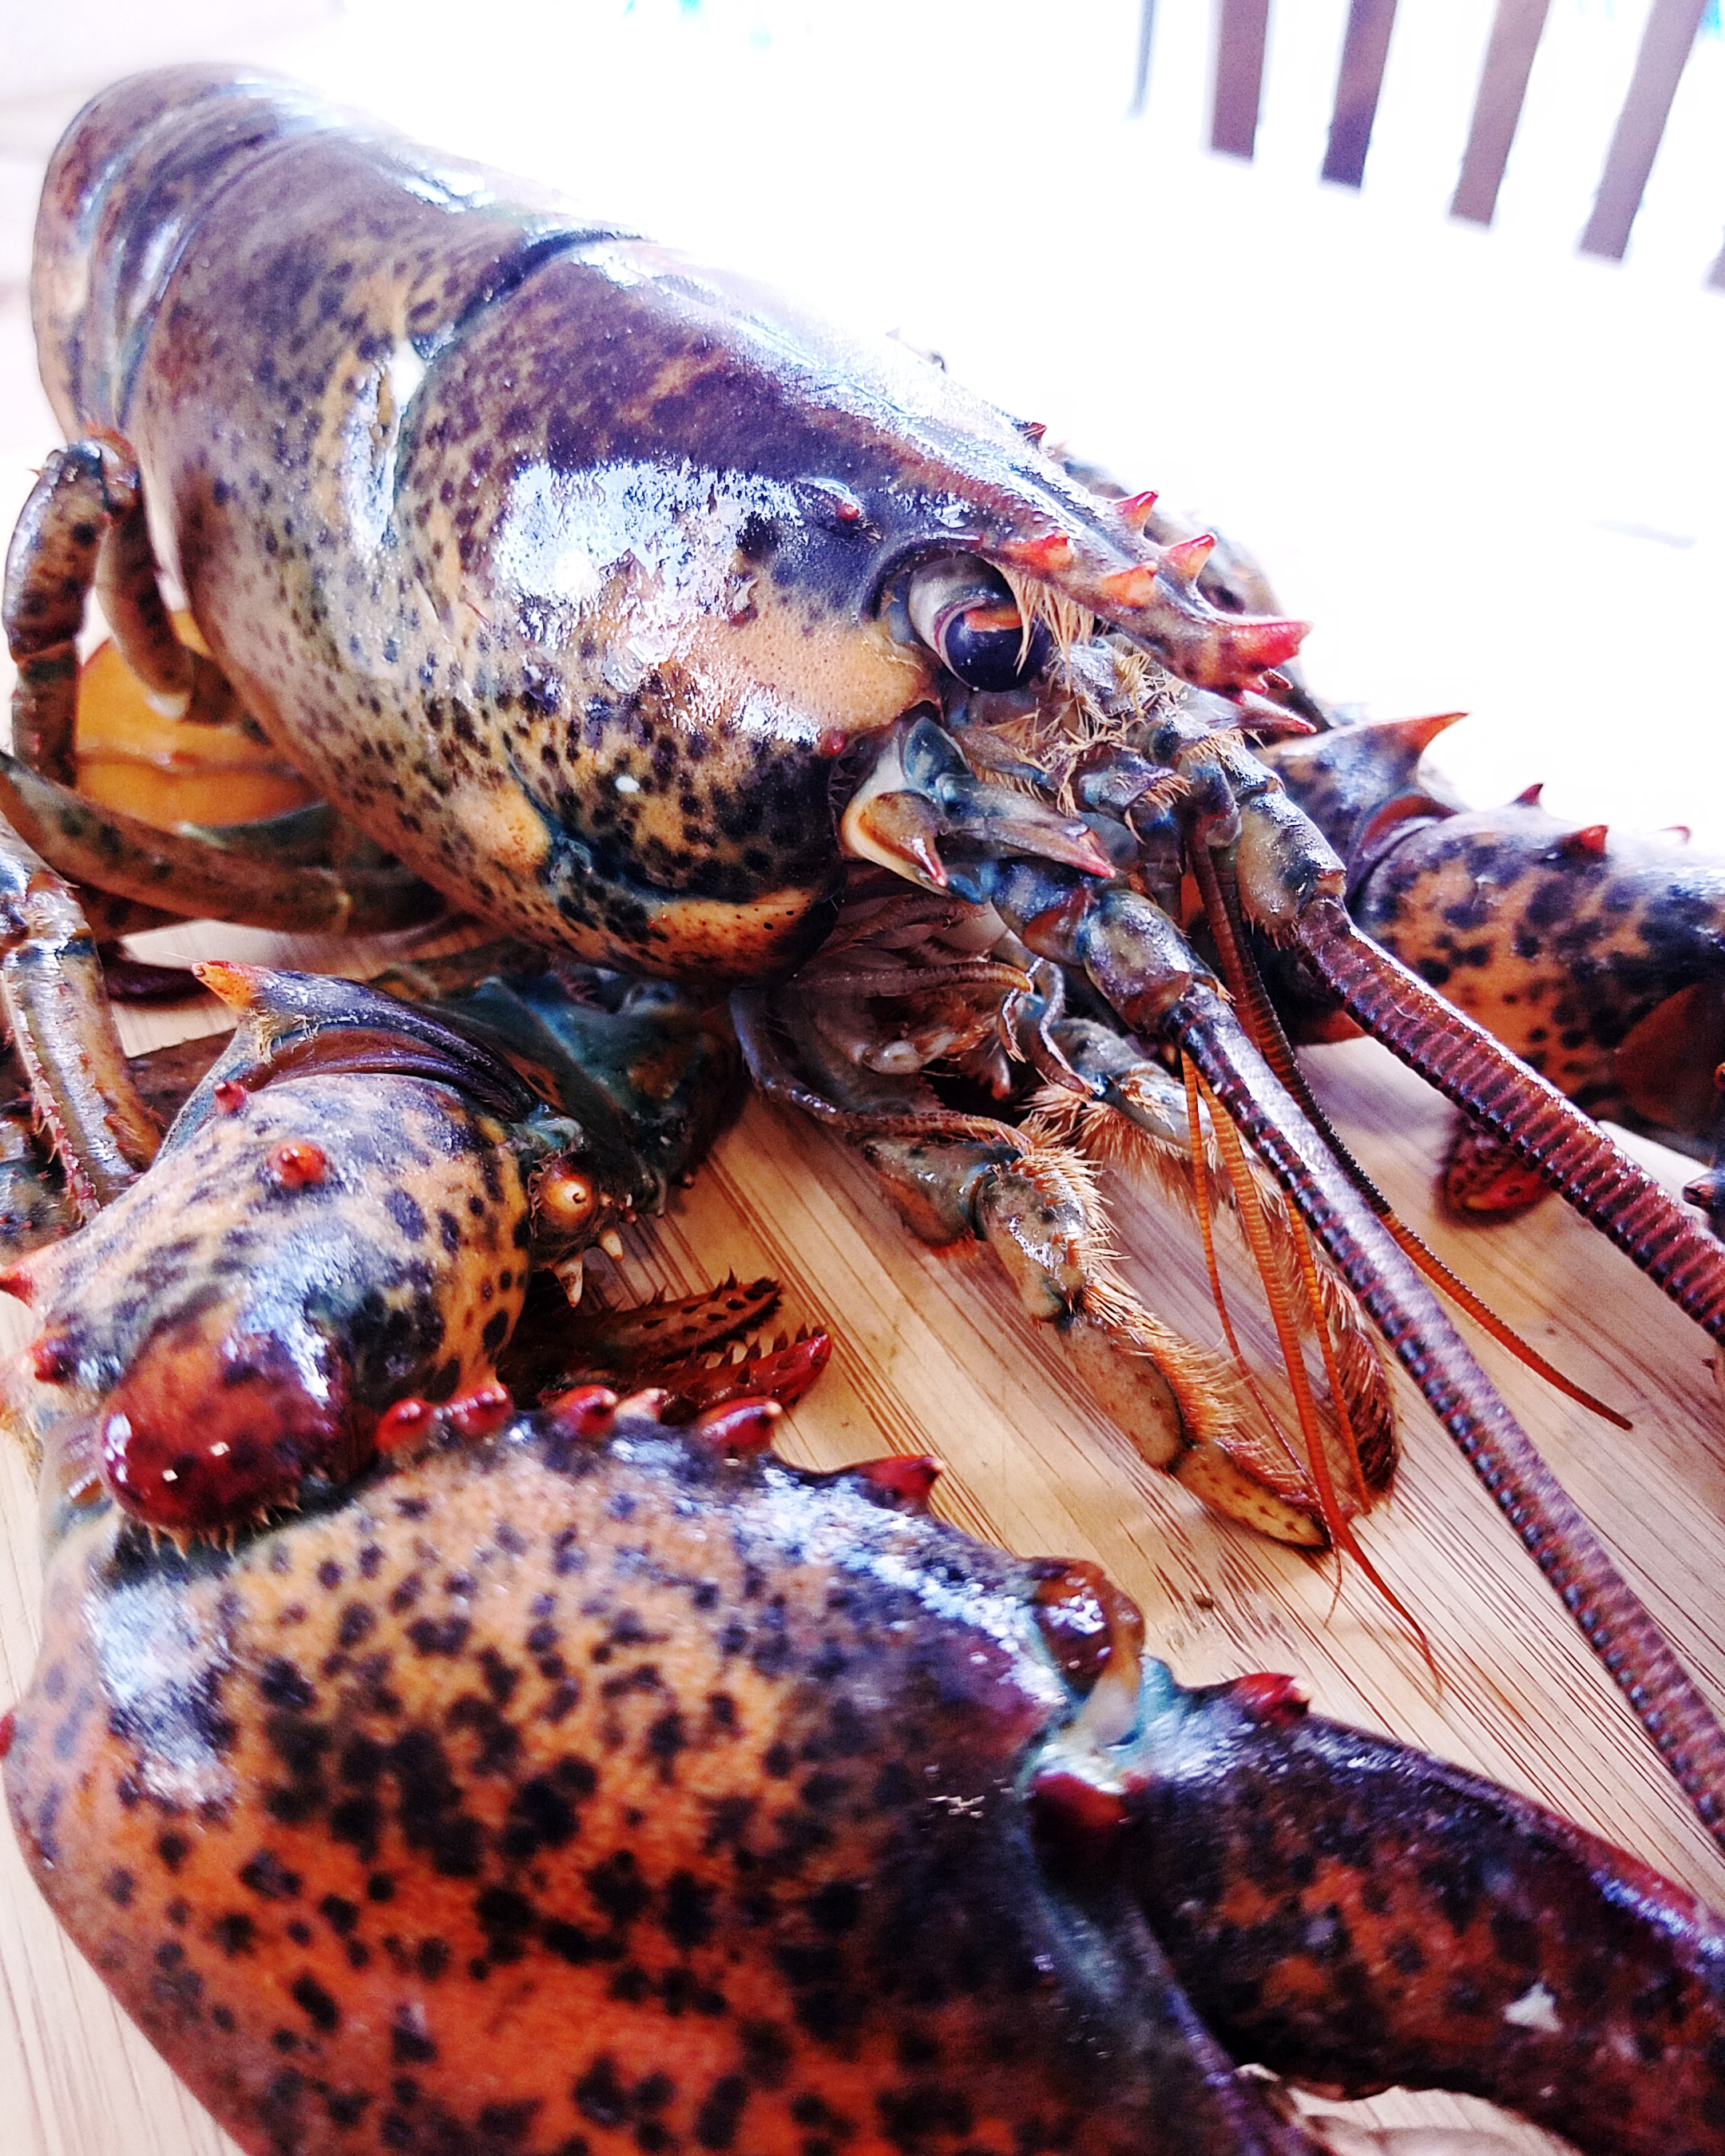 7 Things You May Not Know About Lobsters and Their History